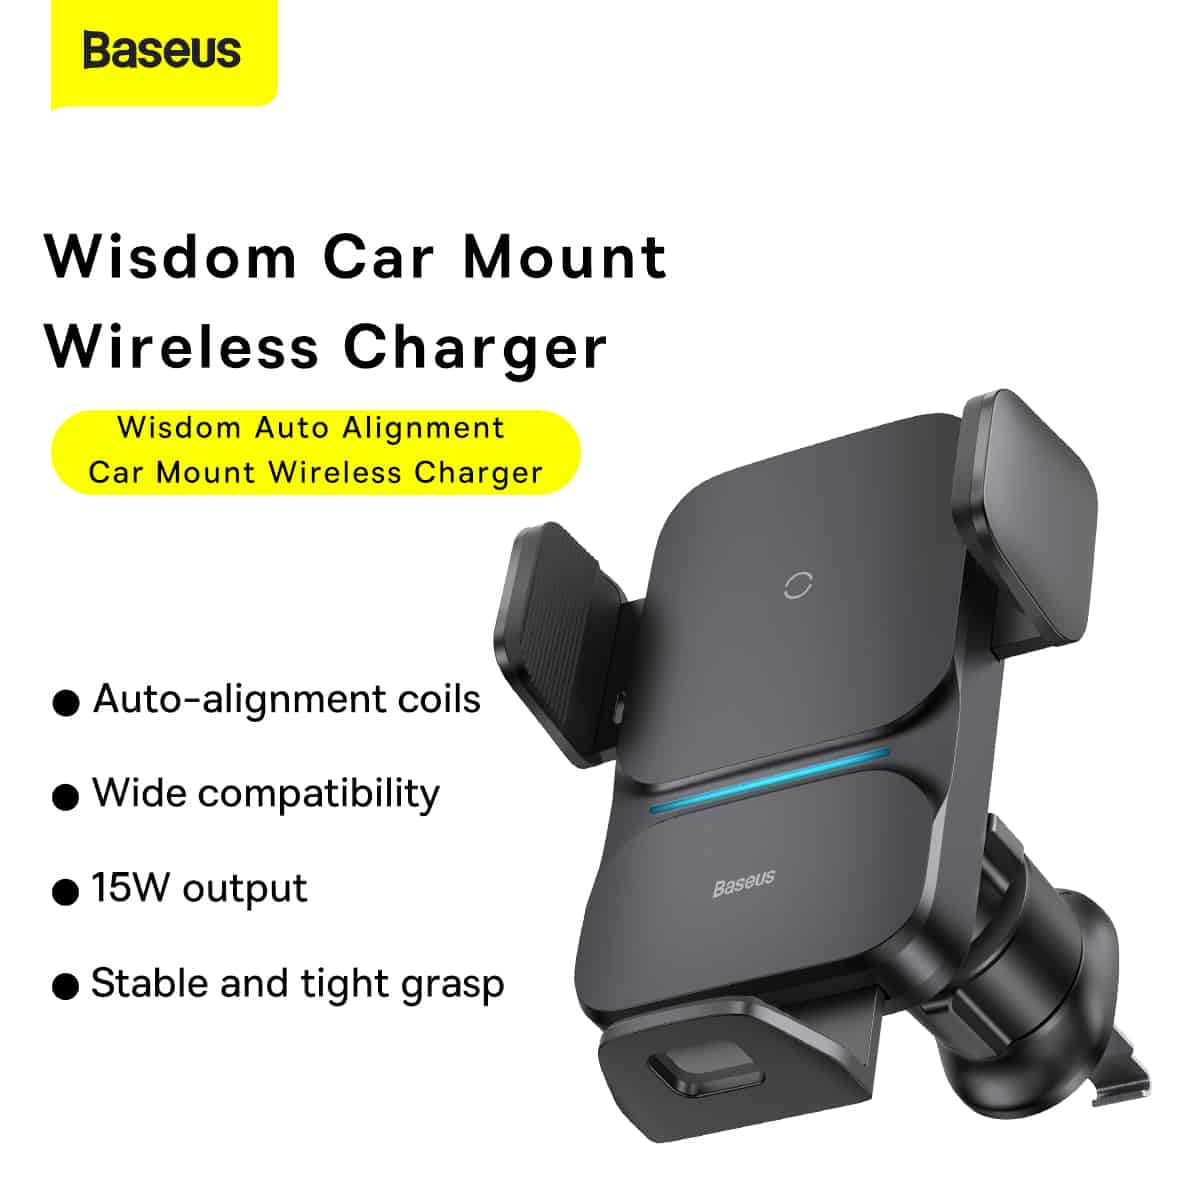 Baseus Wisdom Car Mount Qi 15W Wireless Charger Air Outlet Base 6